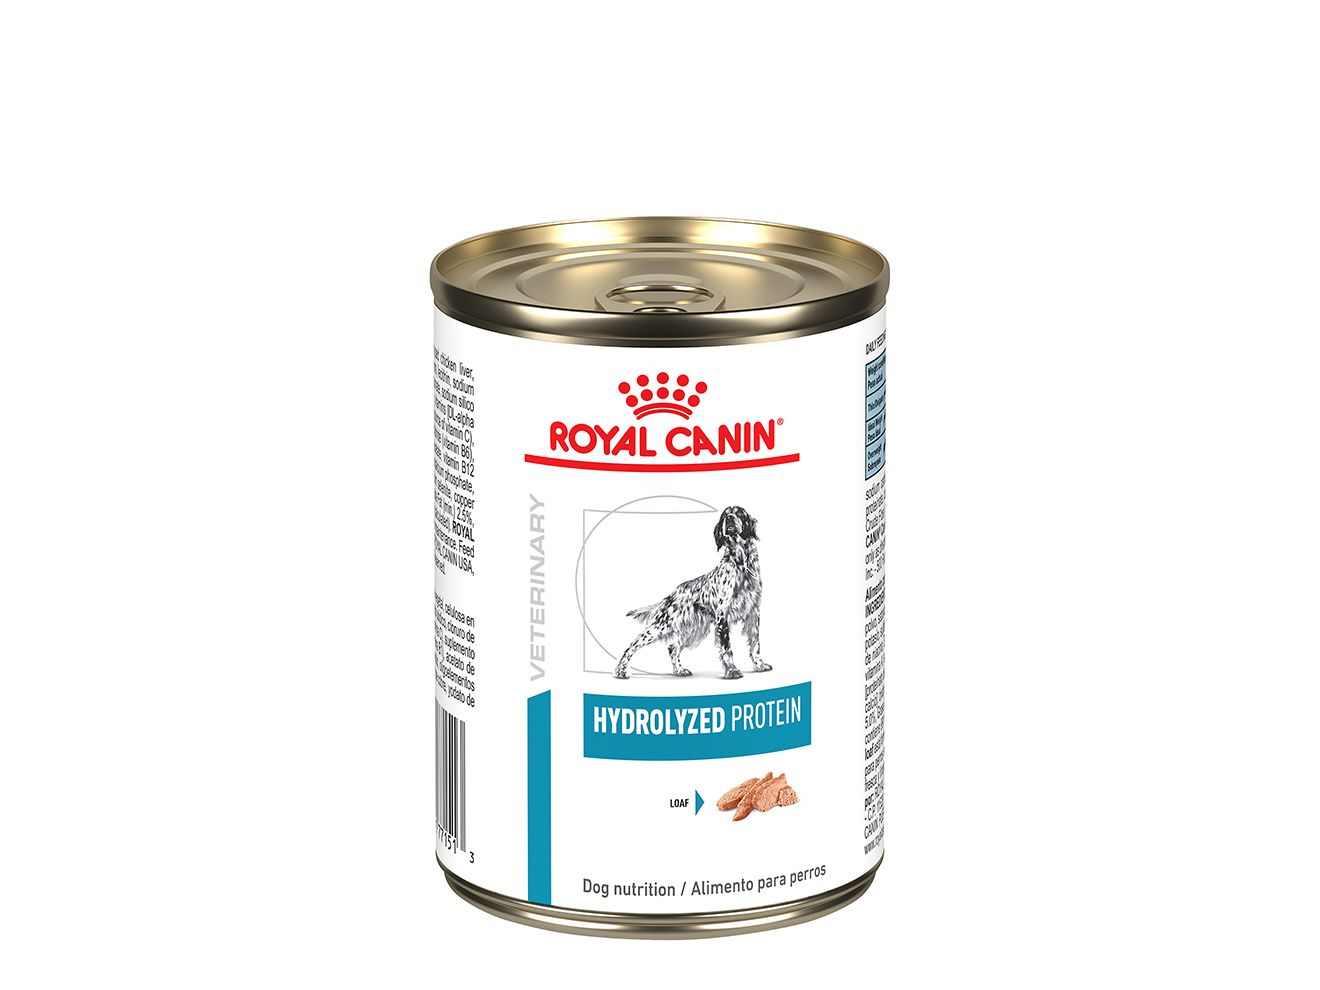 Packshot of Royal Canin Dermatology Canned Diet for dogs